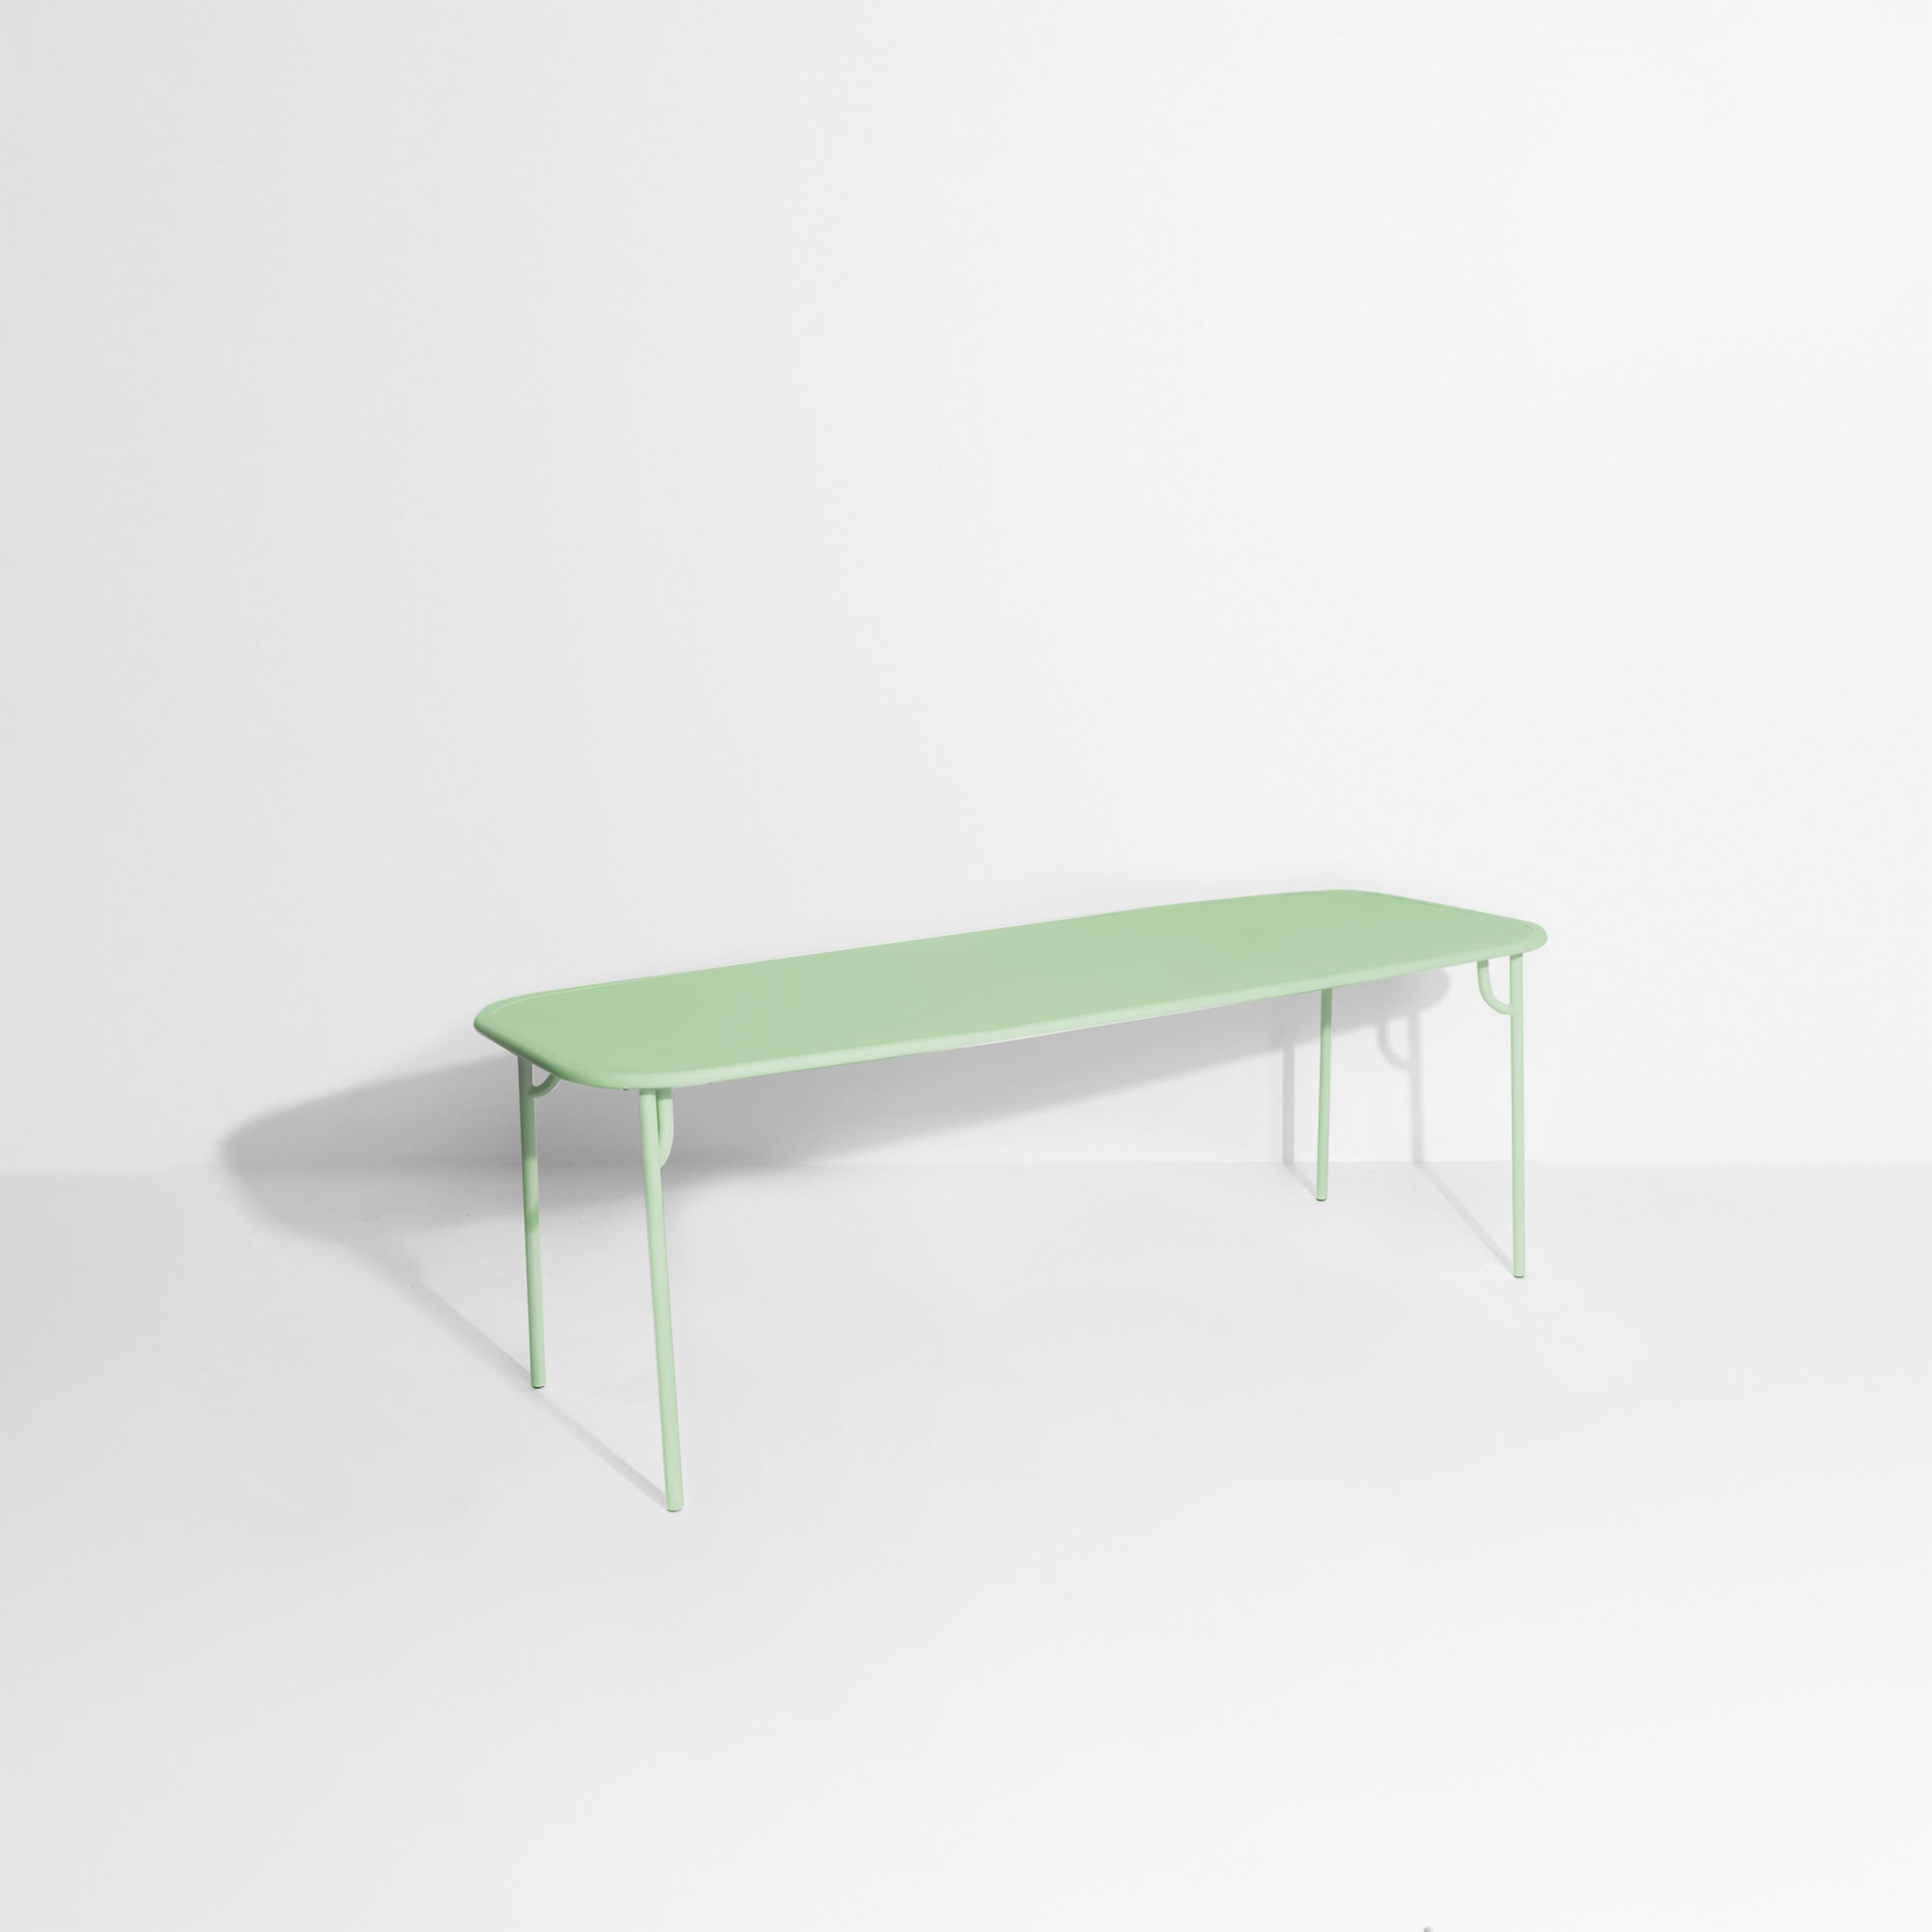 Petite Friture Week-End Large Plain Rectangular Dining Table in Pastel Green Aluminium by Studio BrichetZiegler, 2017

The week-end collection is a full range of outdoor furniture, in aluminium grained epoxy paint, matt finish, that includes 18